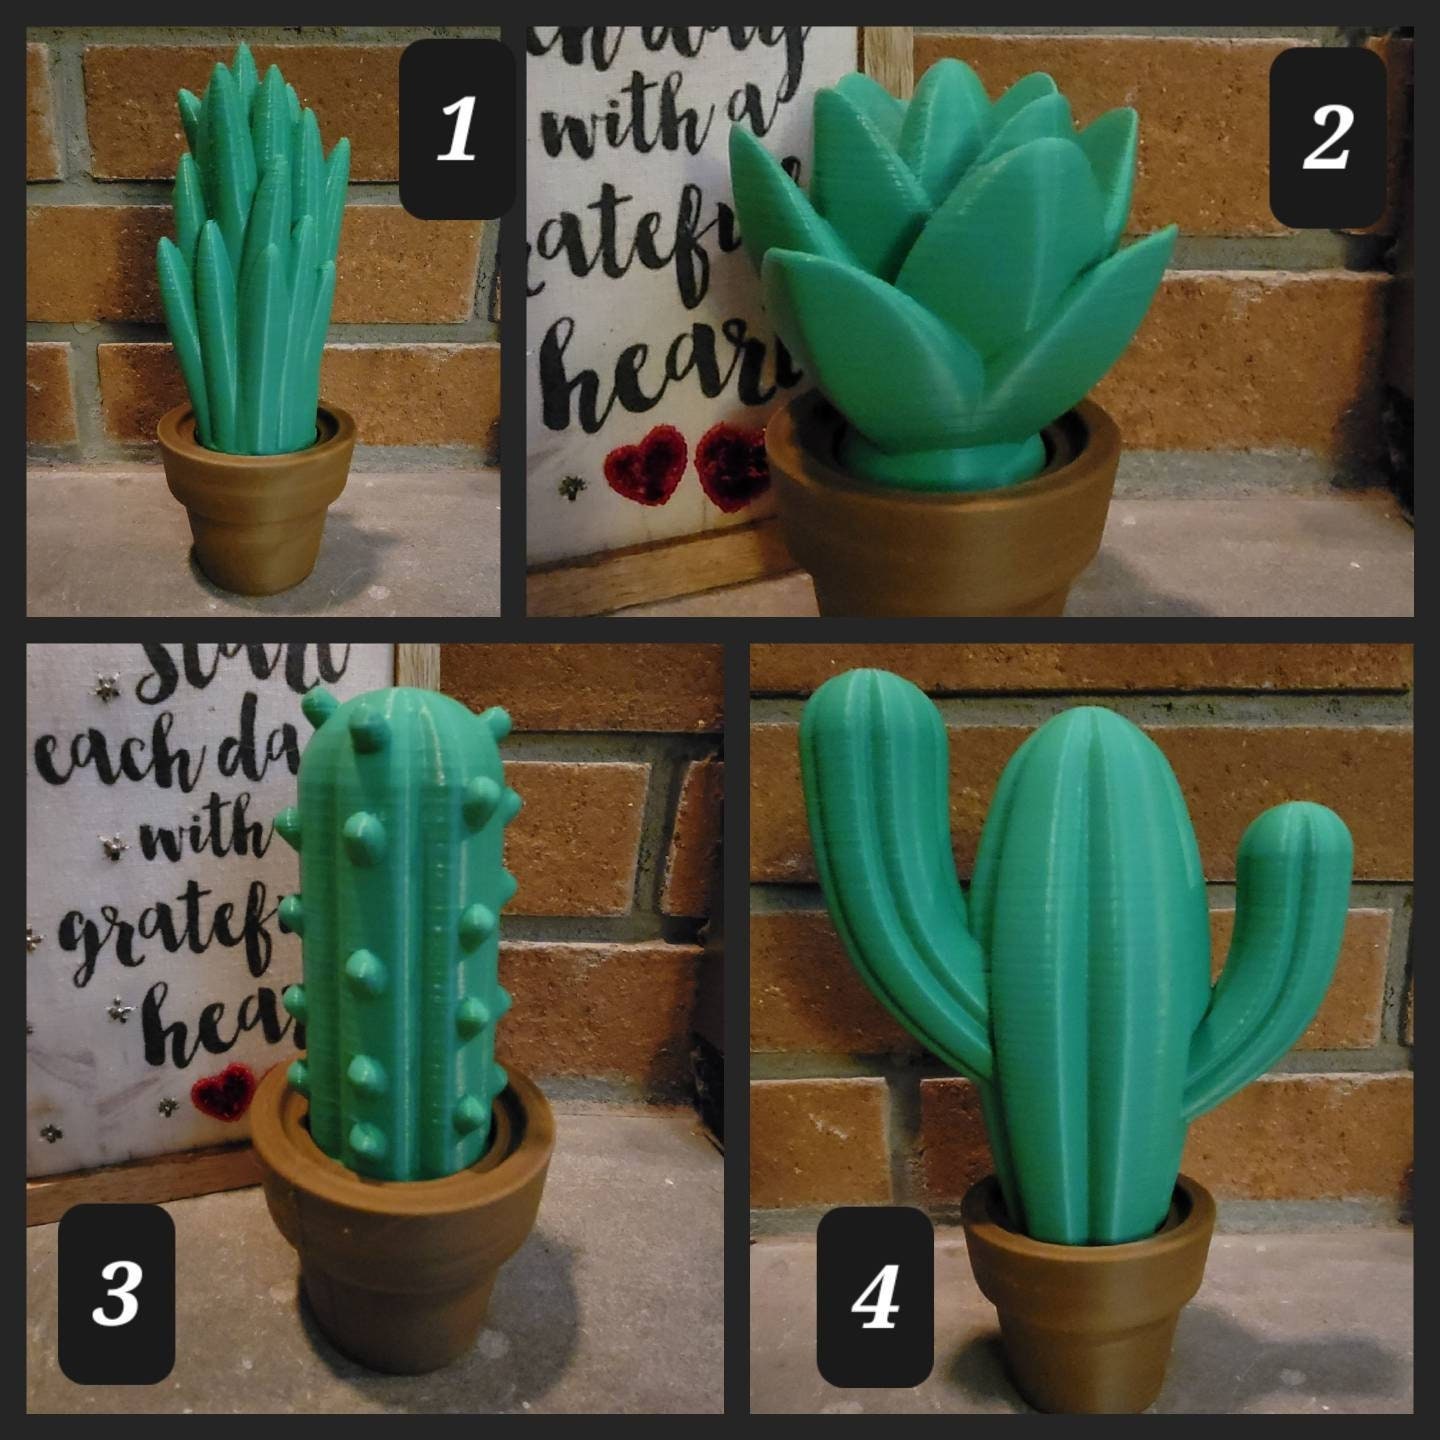 Cactus and Pot Home Decor 3D Printed - Etsy